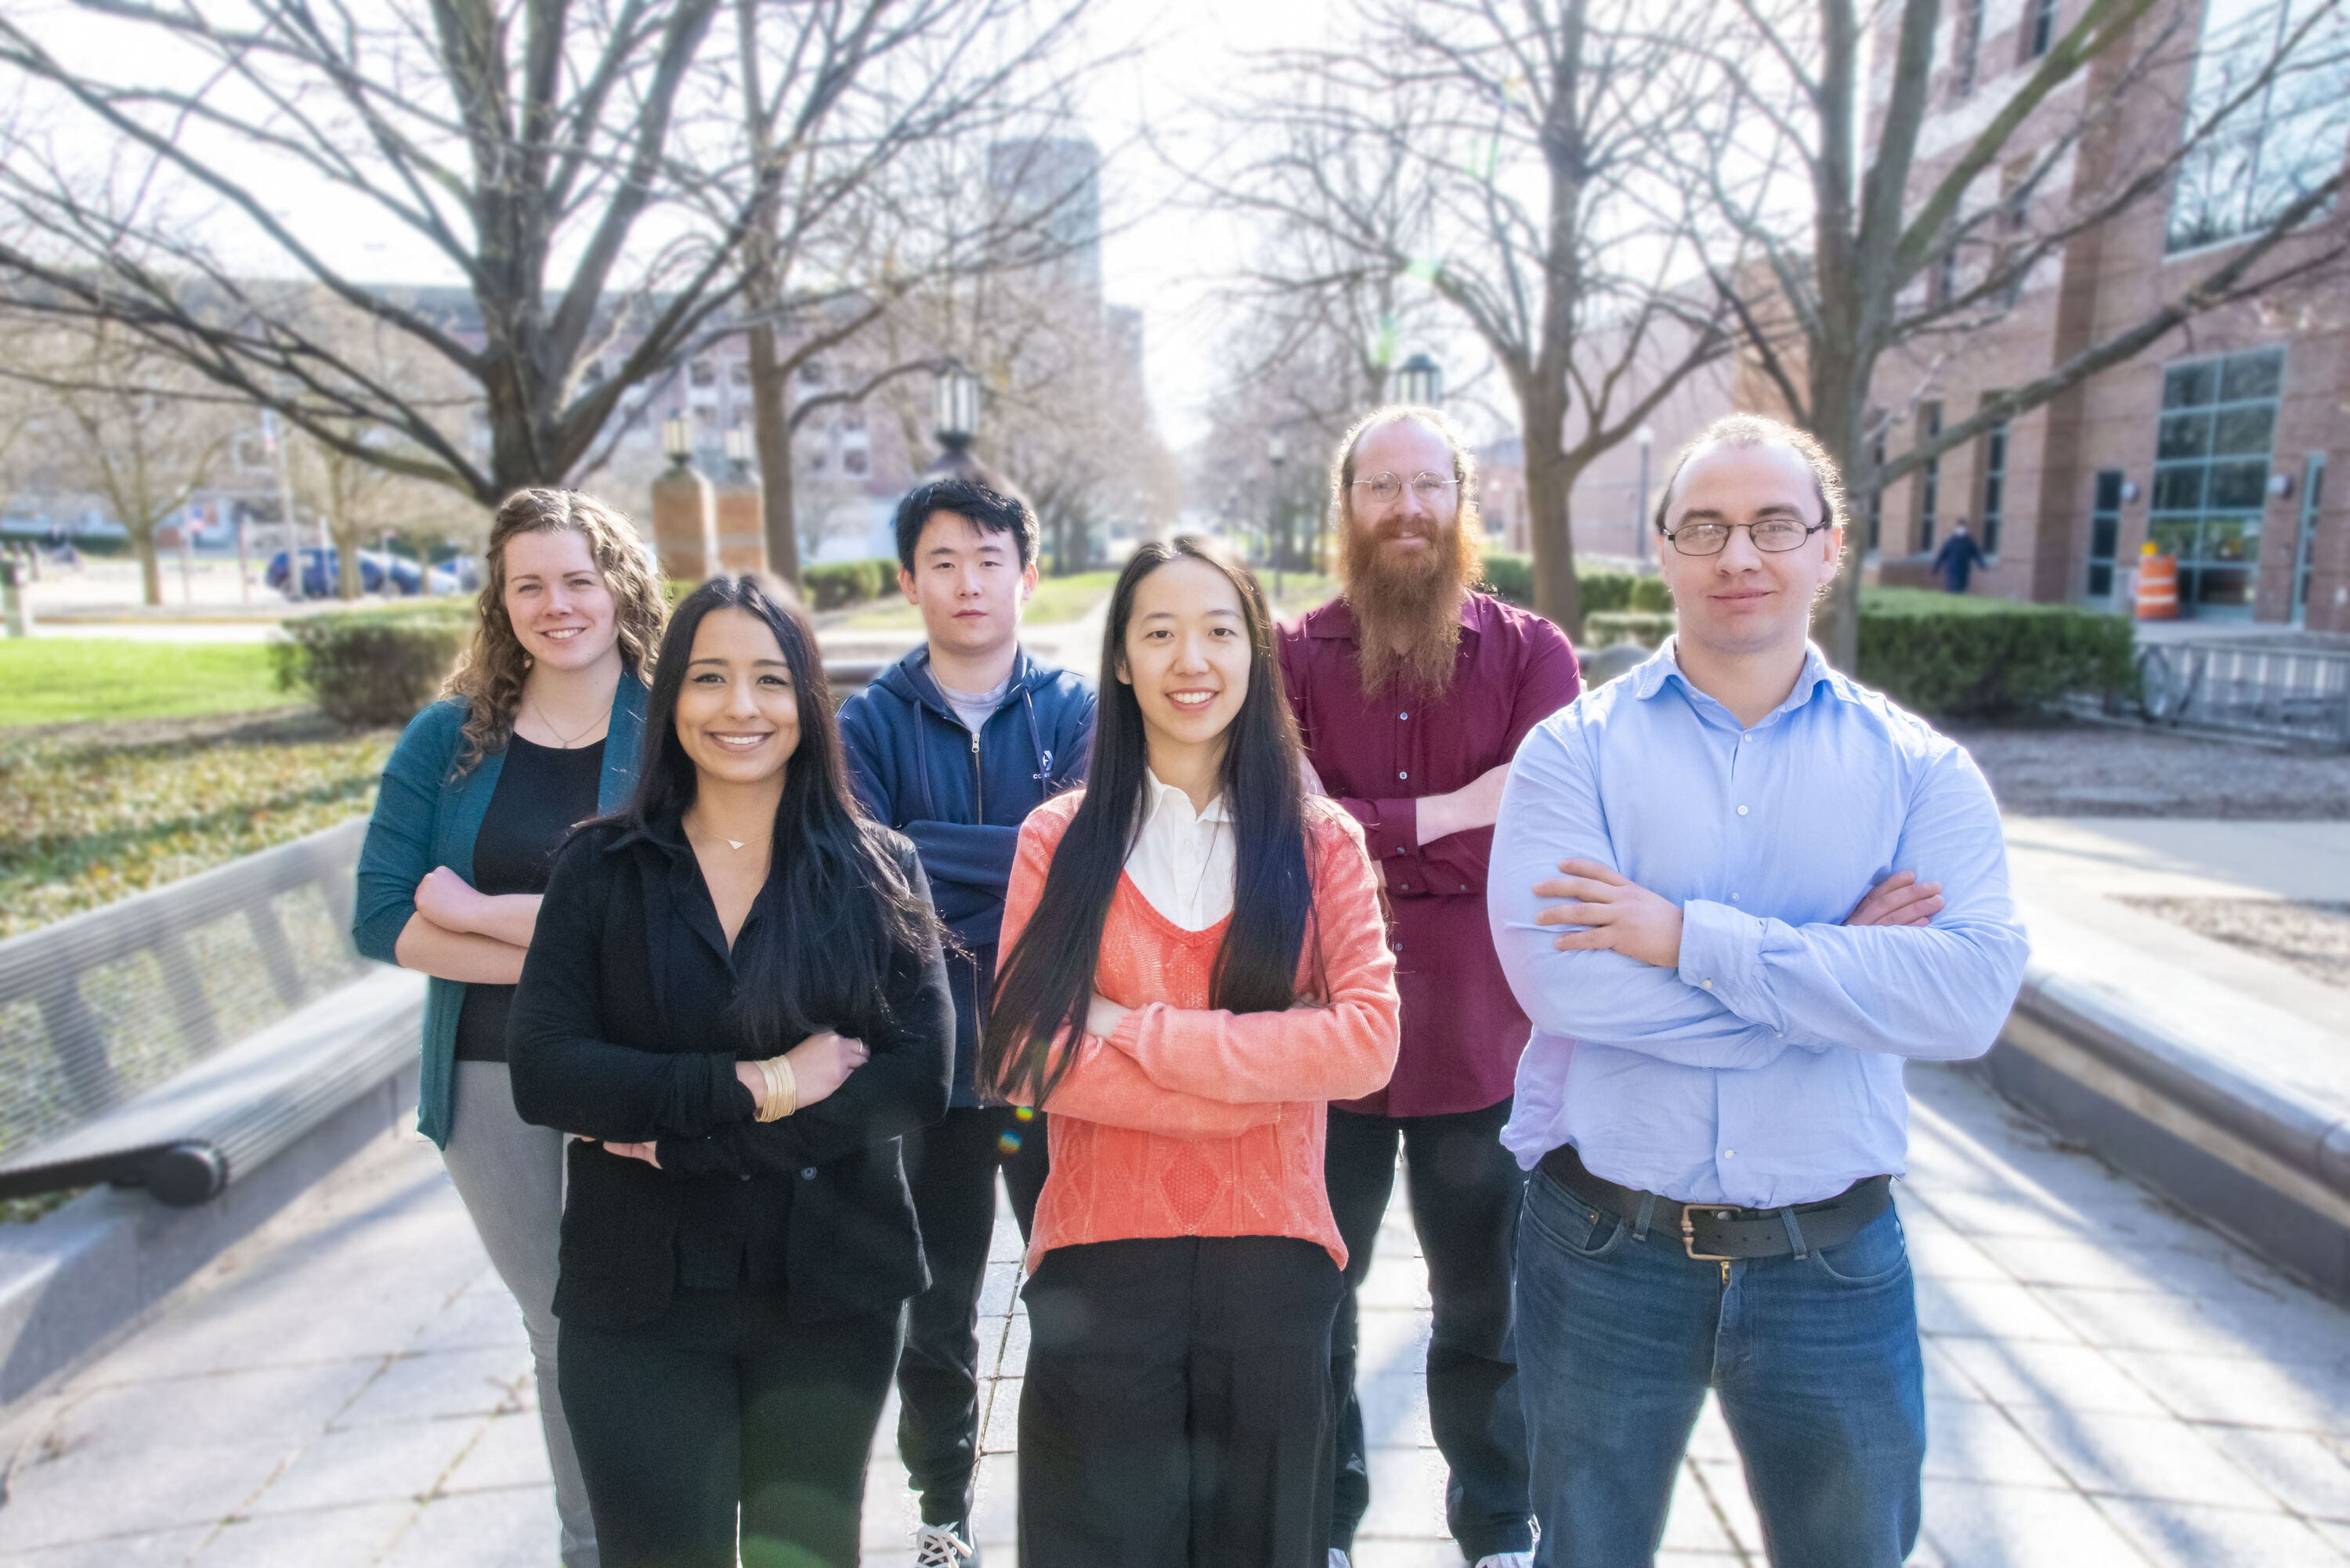 The 2023 cohort of the Beckman Institute Postdoctoral Fellows Program (from left): Kelly Powderly; Patricia Cintora; Zhengchang Kou; Yannan Hu; Zane Thornburg; and Alejandro De la Cadena. They are standing outside in a group with arms folded, smiling for the camera.